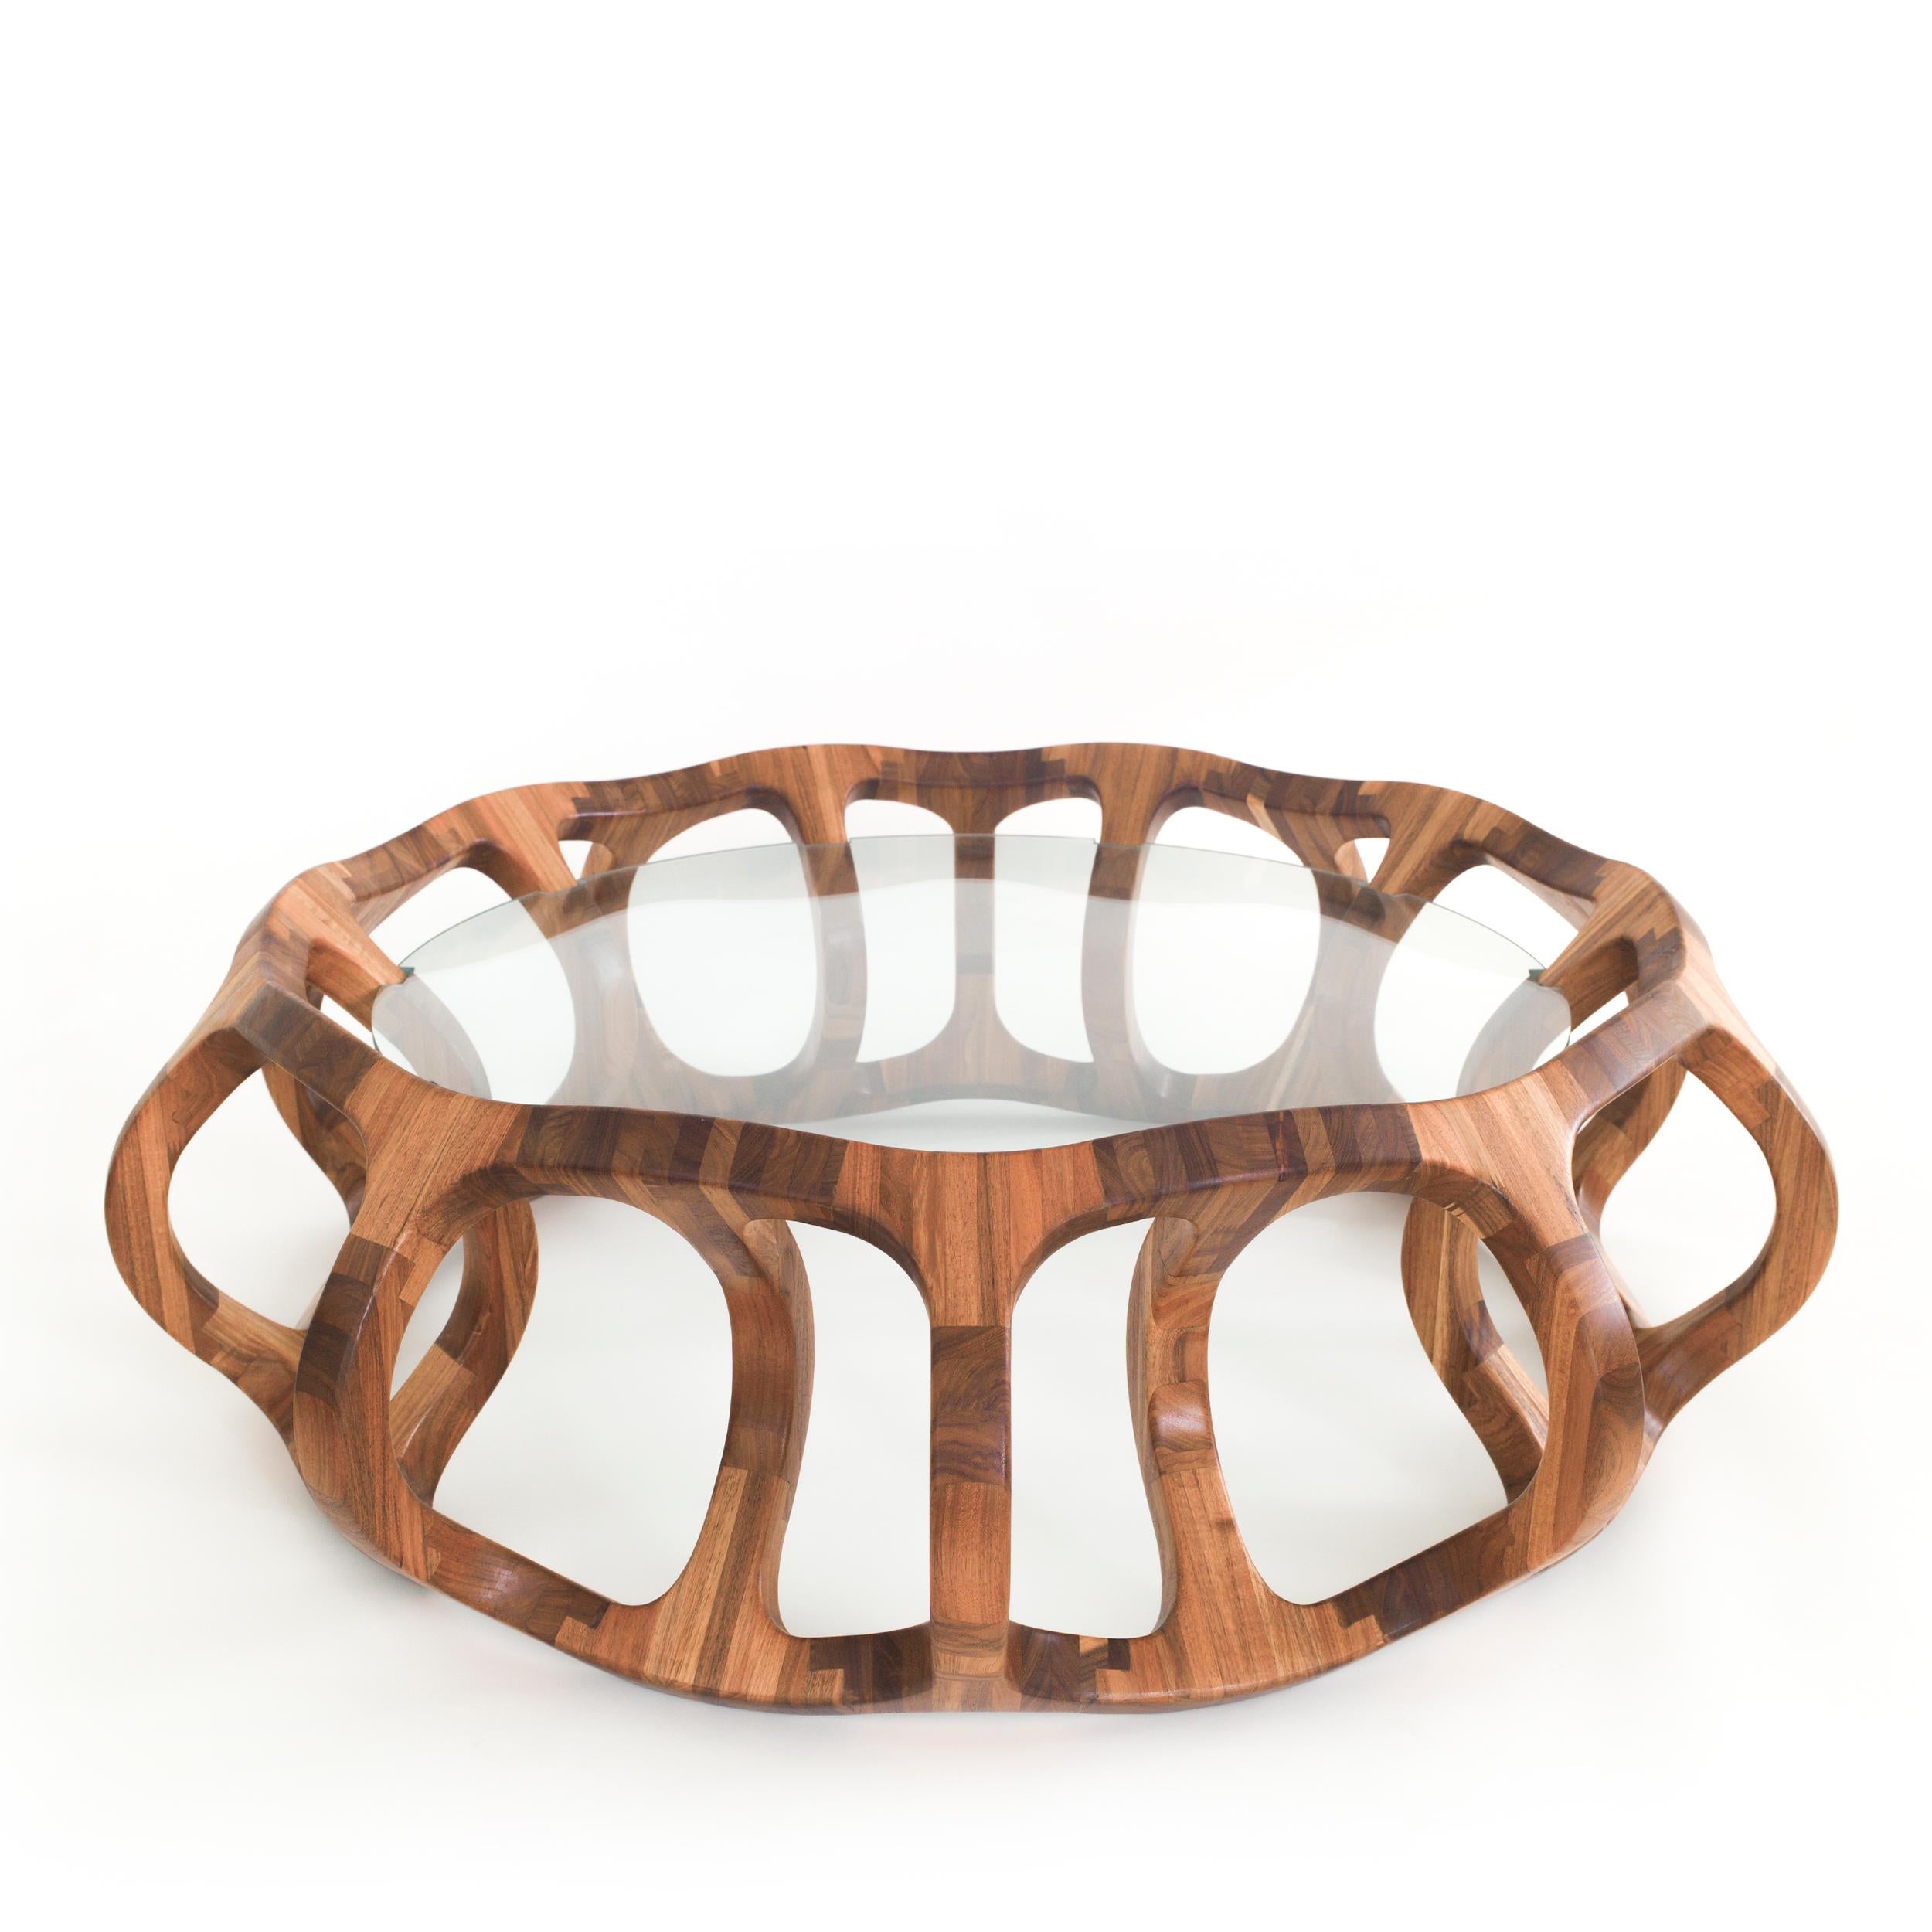 Other Toro G10, Geometric Sculptural Center Table Made of Solid Wood by Pedro Cerisola For Sale